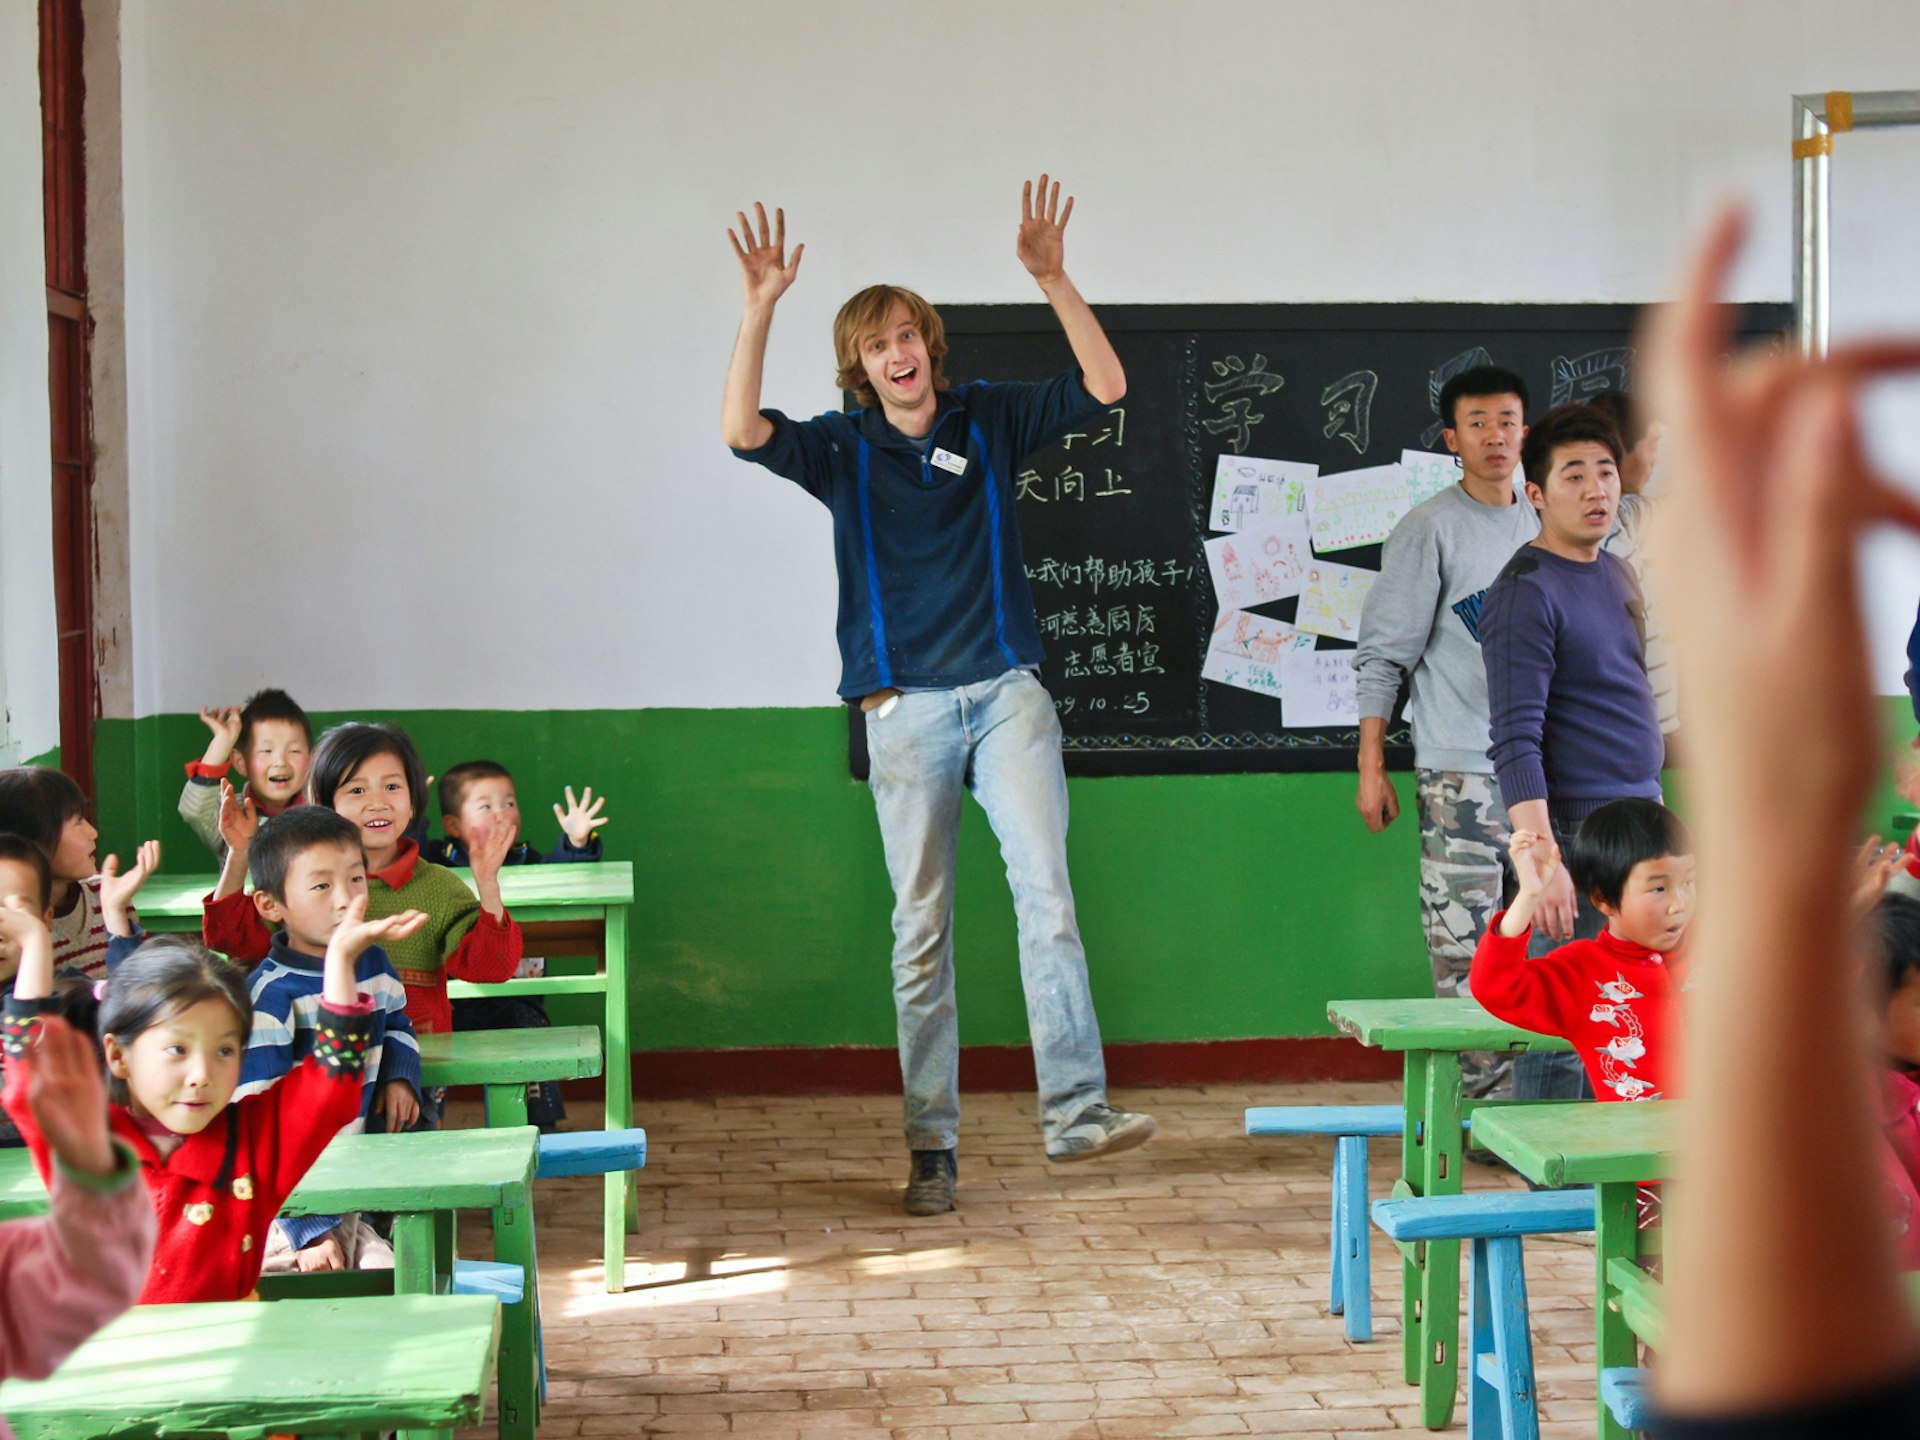 A man teaching abroad in China